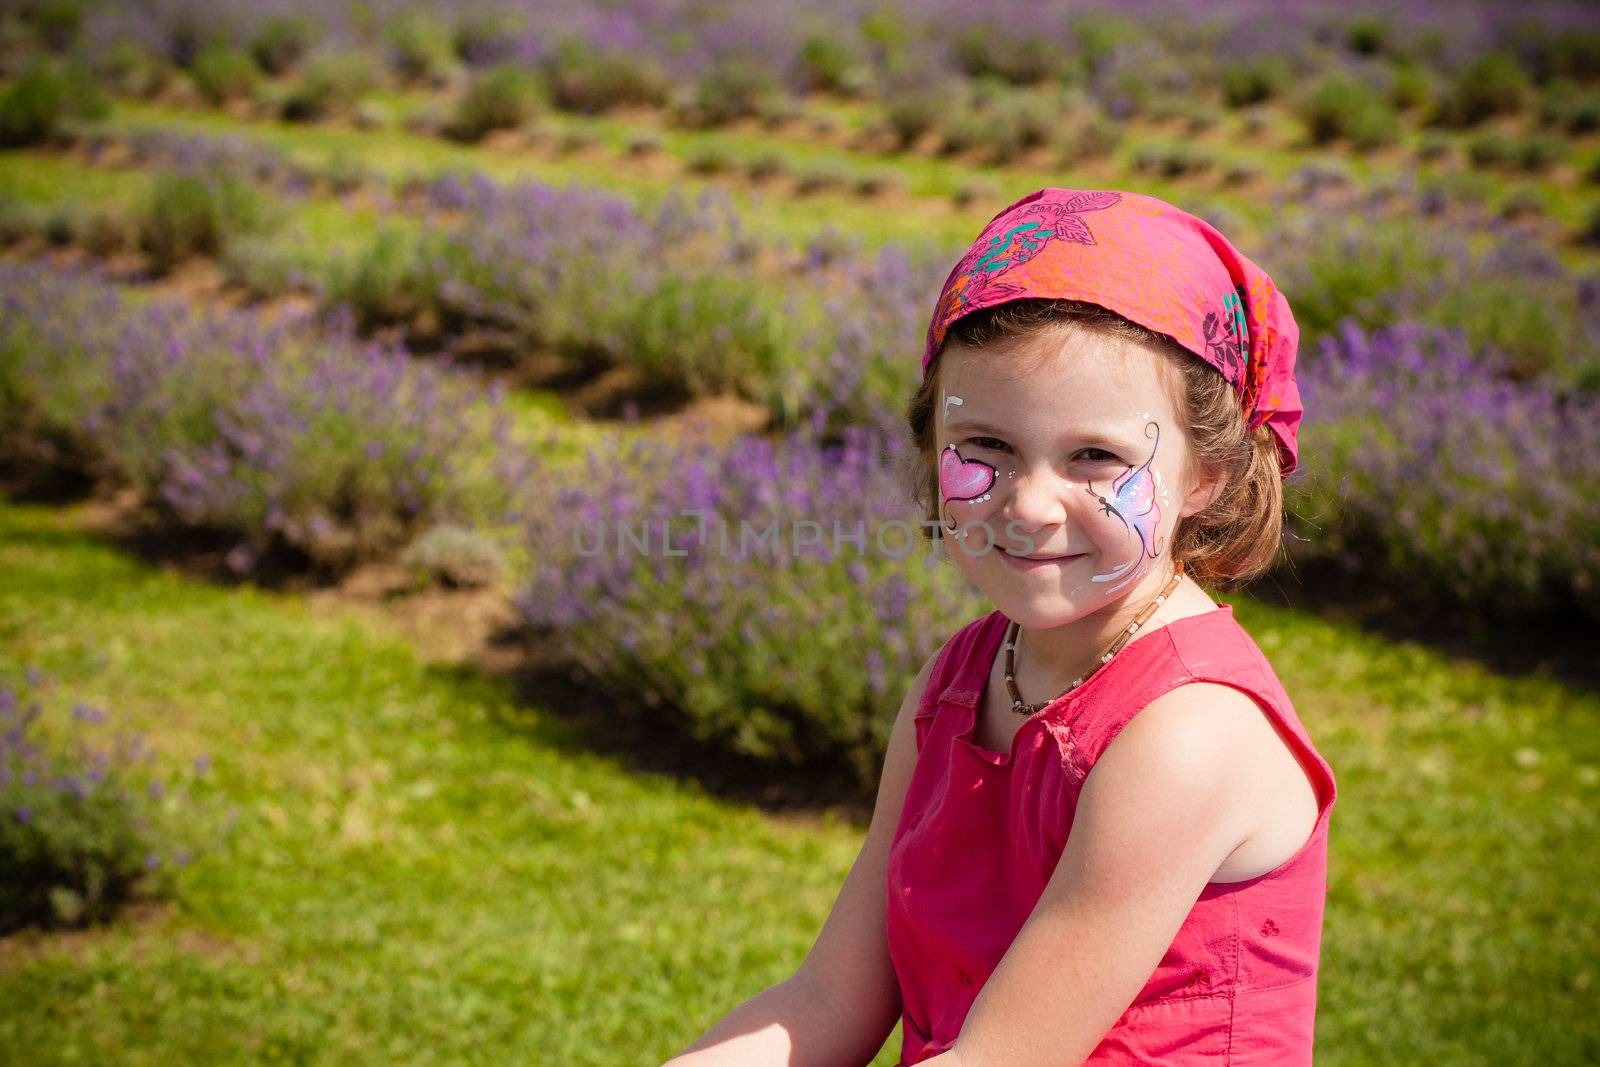 Cute little girl with make-up in a lavender field